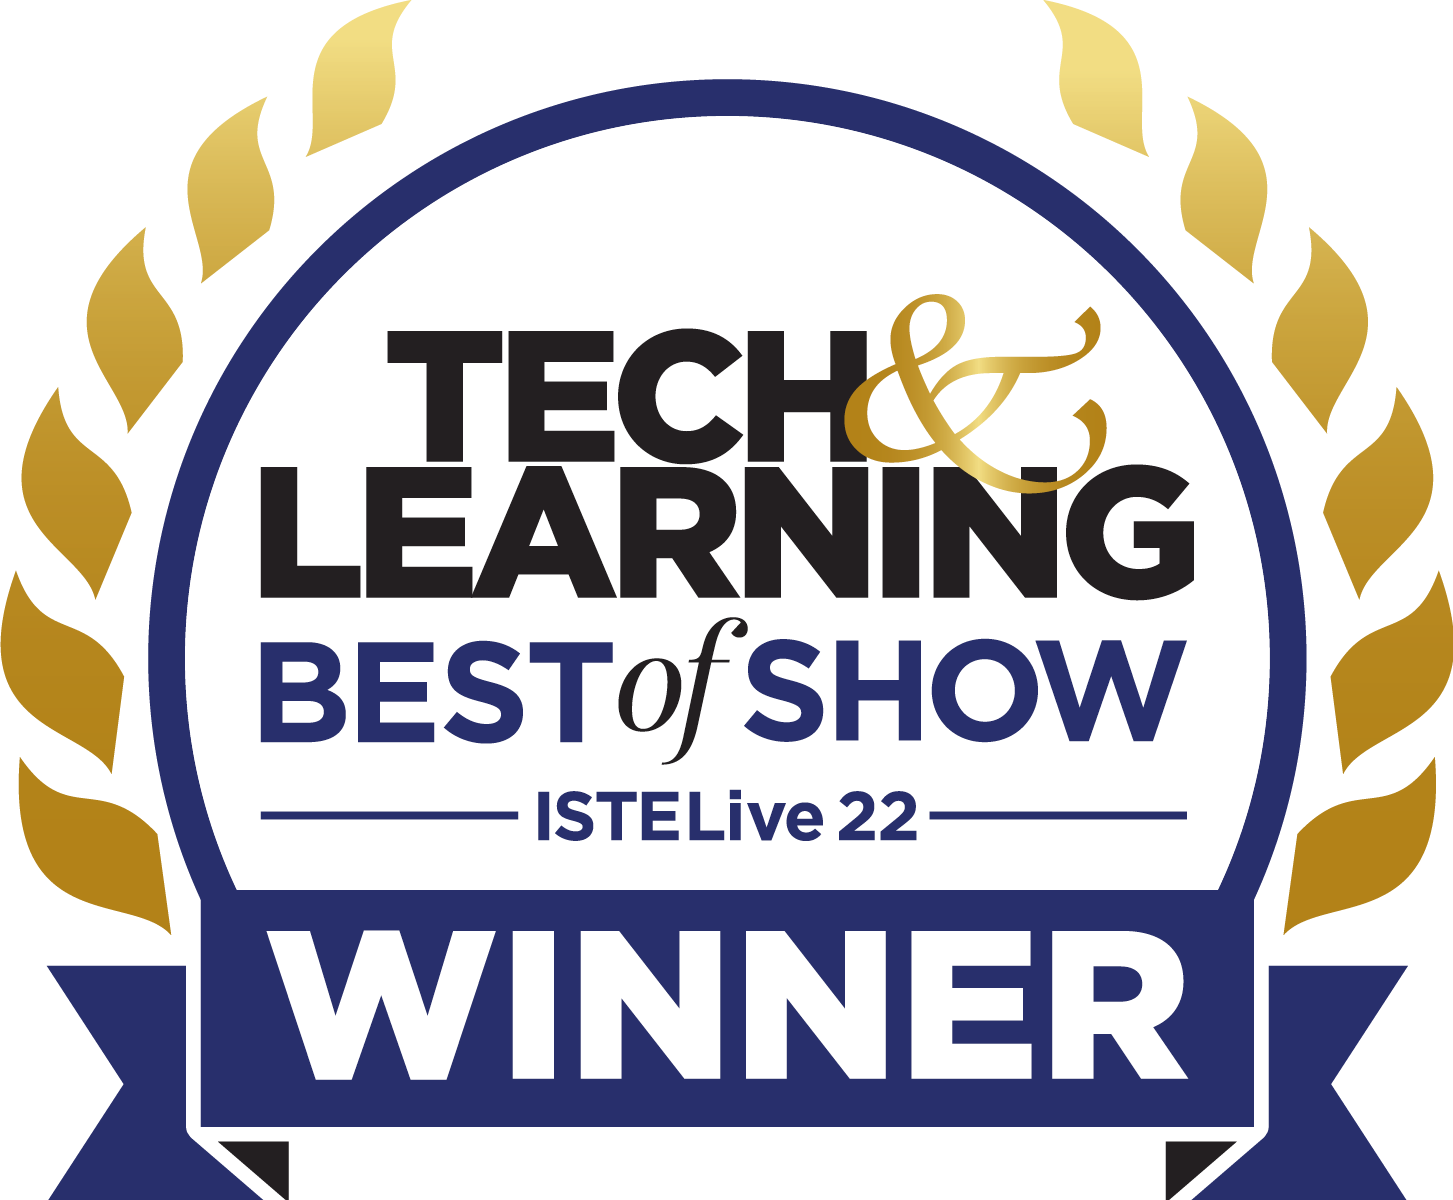 sora is a tech & learning best of show award winner at ISTELive 22